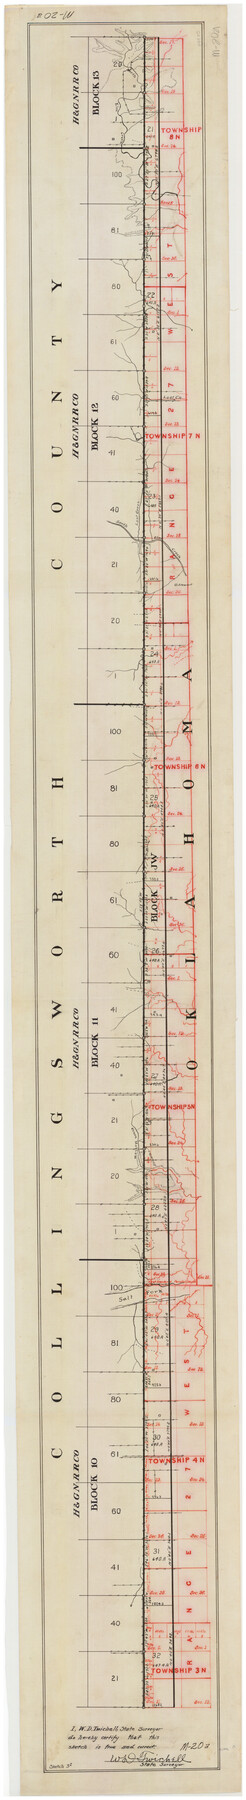 89663, [Sketch Between Collingsworth County and Oklahoma], Twichell Survey Records